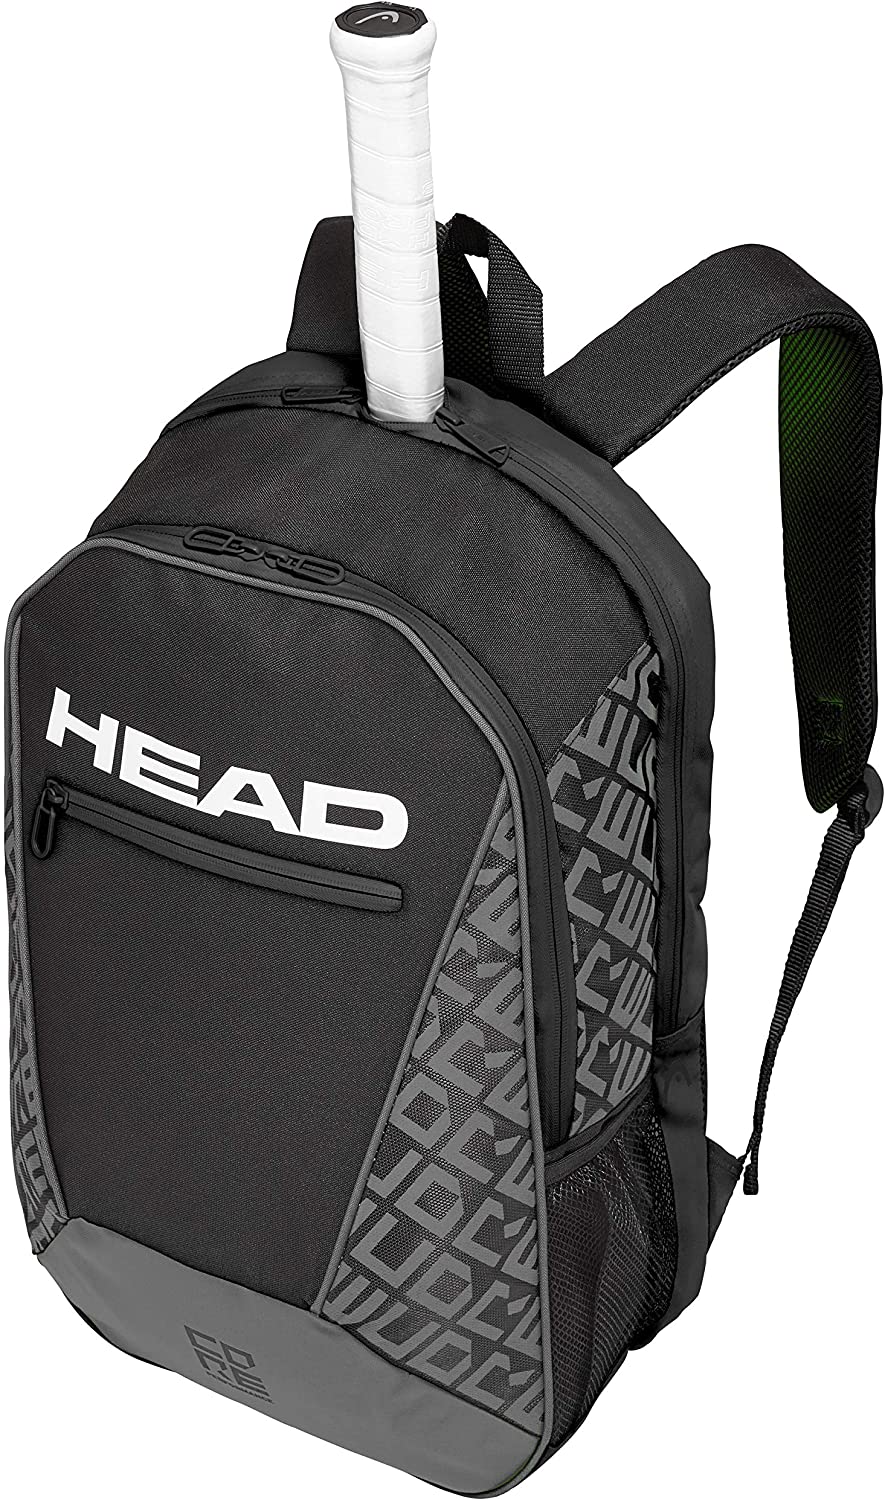 HEAD Gray and Black Tennis Sports Equipment Backpack - image 1 of 6